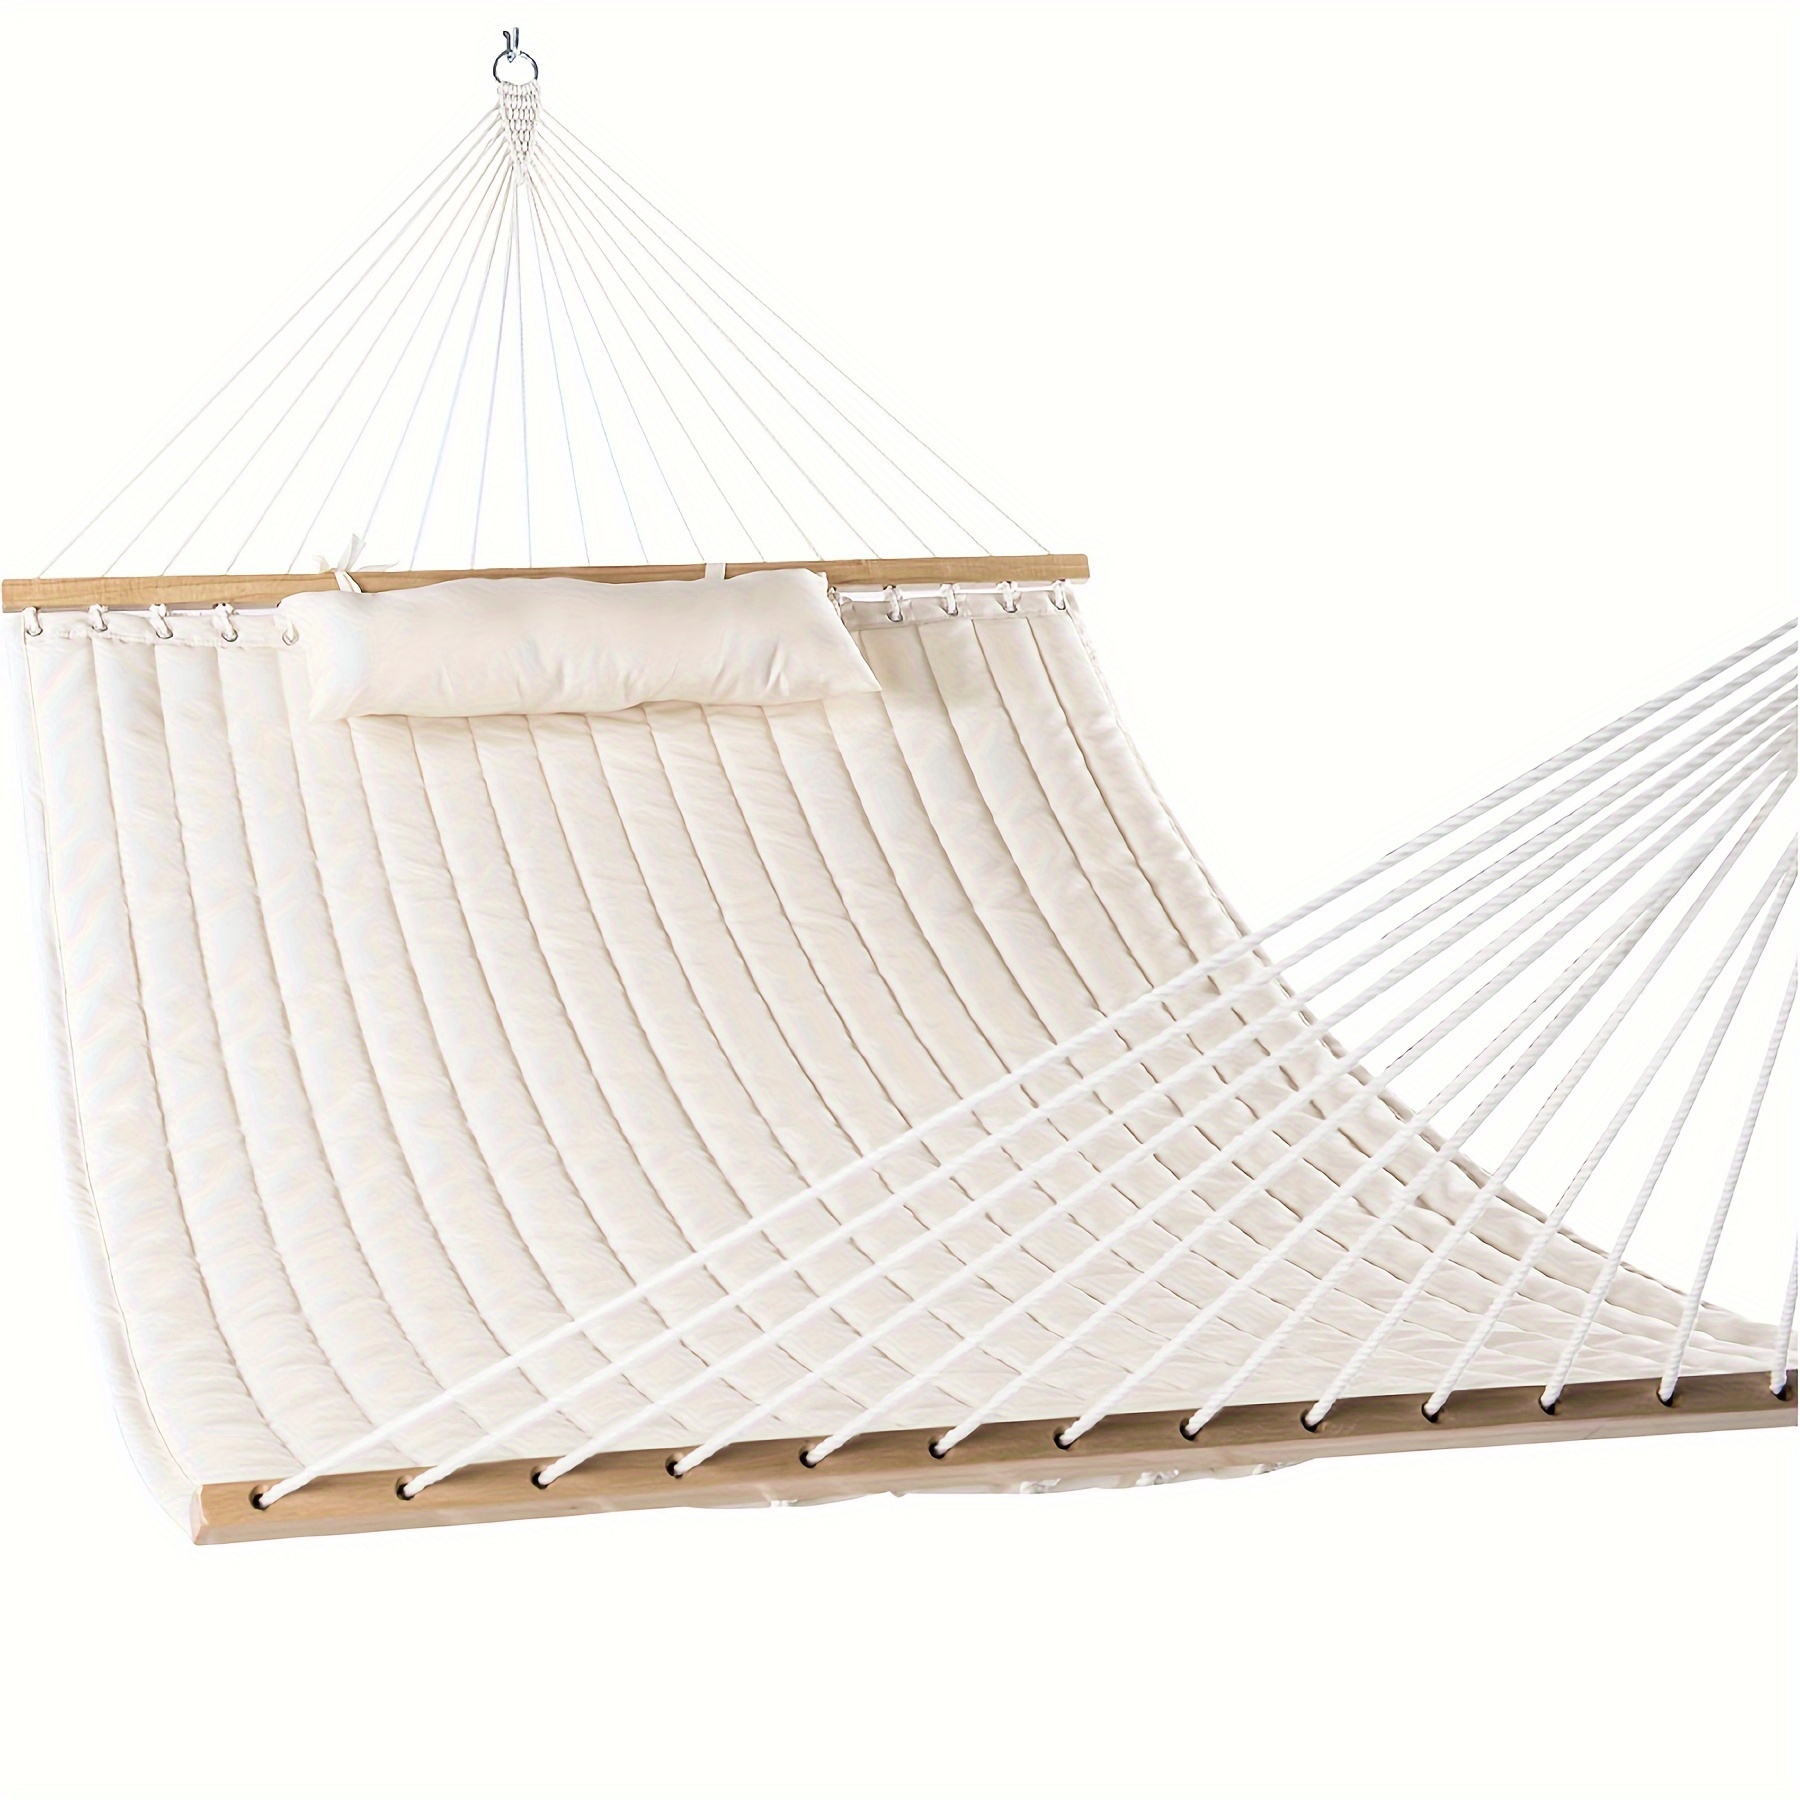 

Double Quilted Fabric Swing Hammock With Pillow 55 Inches Beige